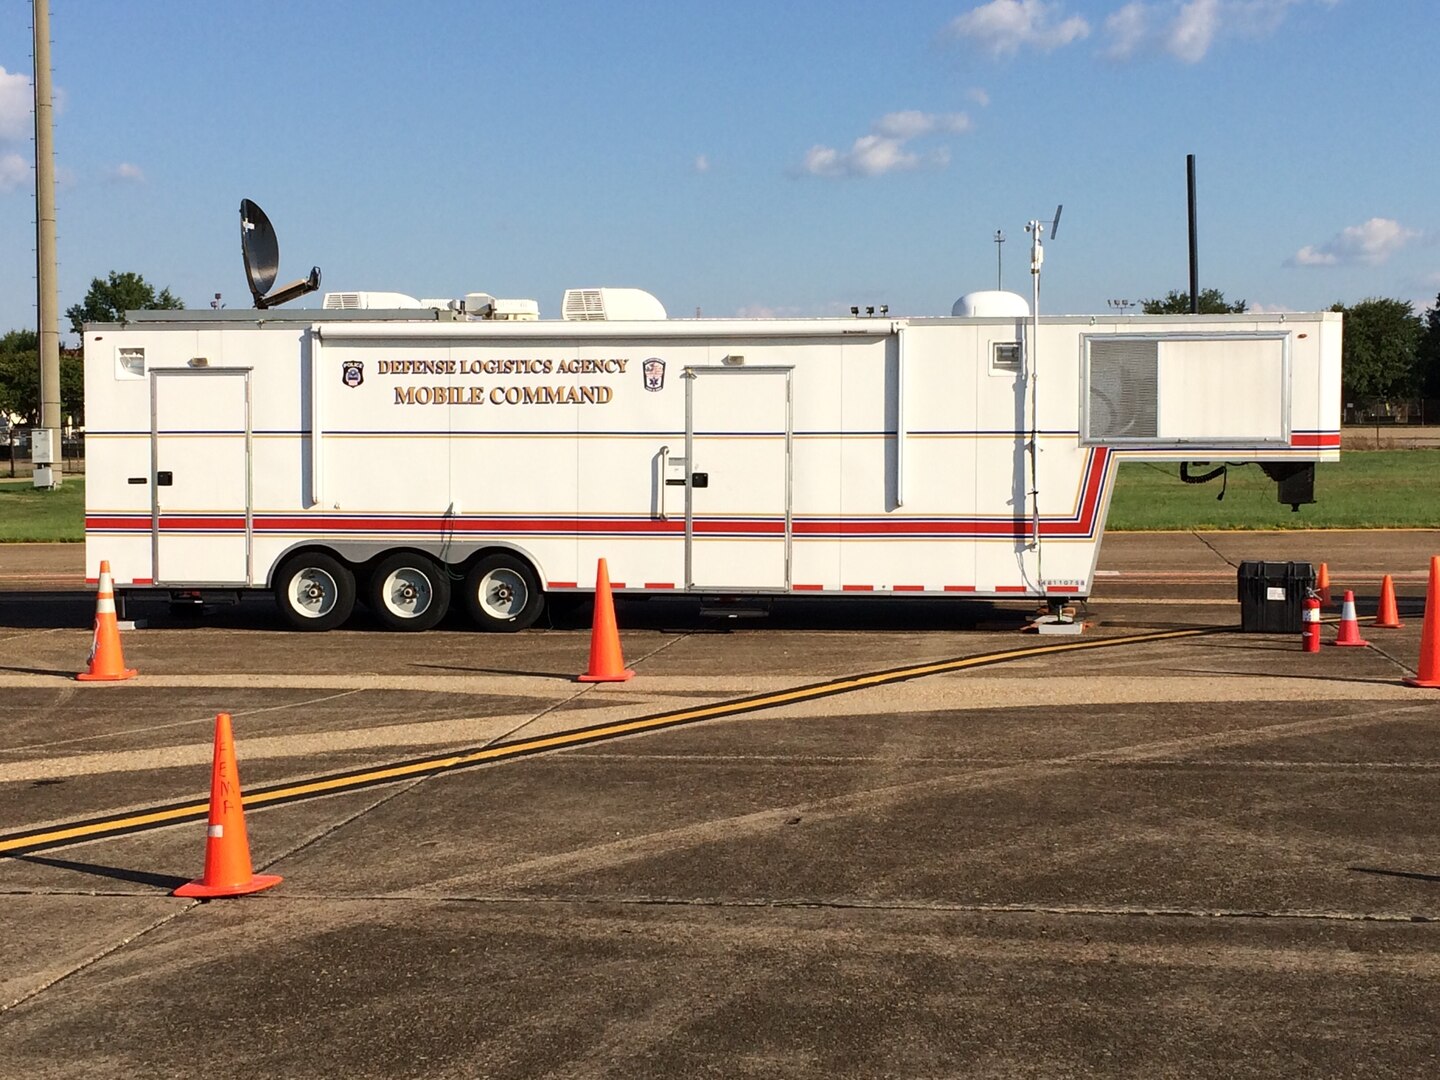 DLA Distributions Mobile Command center is on site at Maxwell Air Force Base located in Montgomery, Ala.